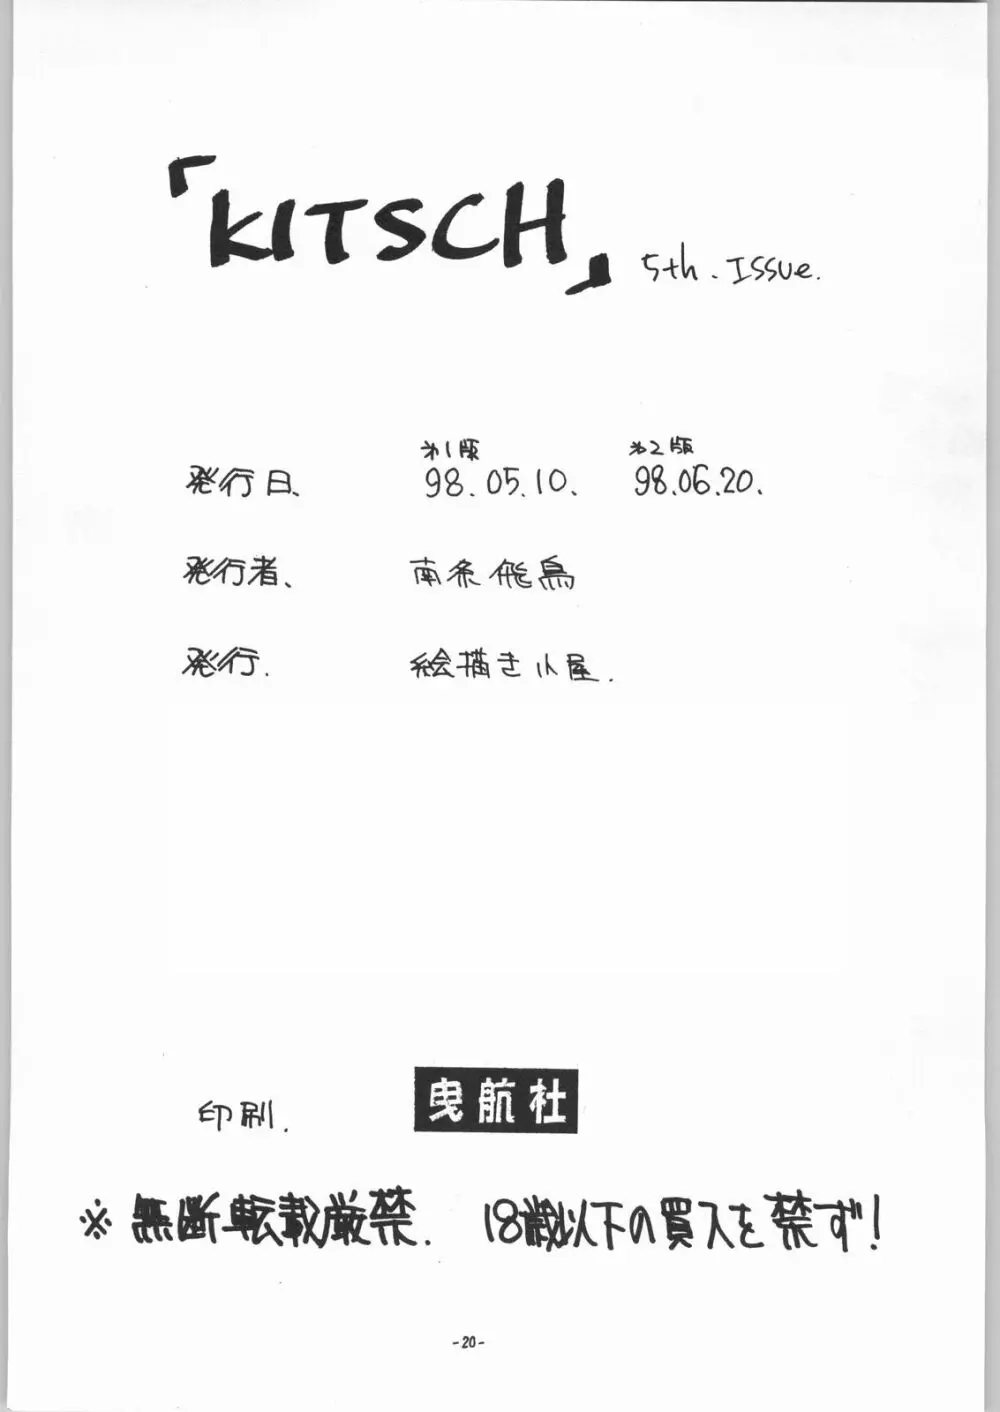 KITSCH 5th ISSUE Page.21